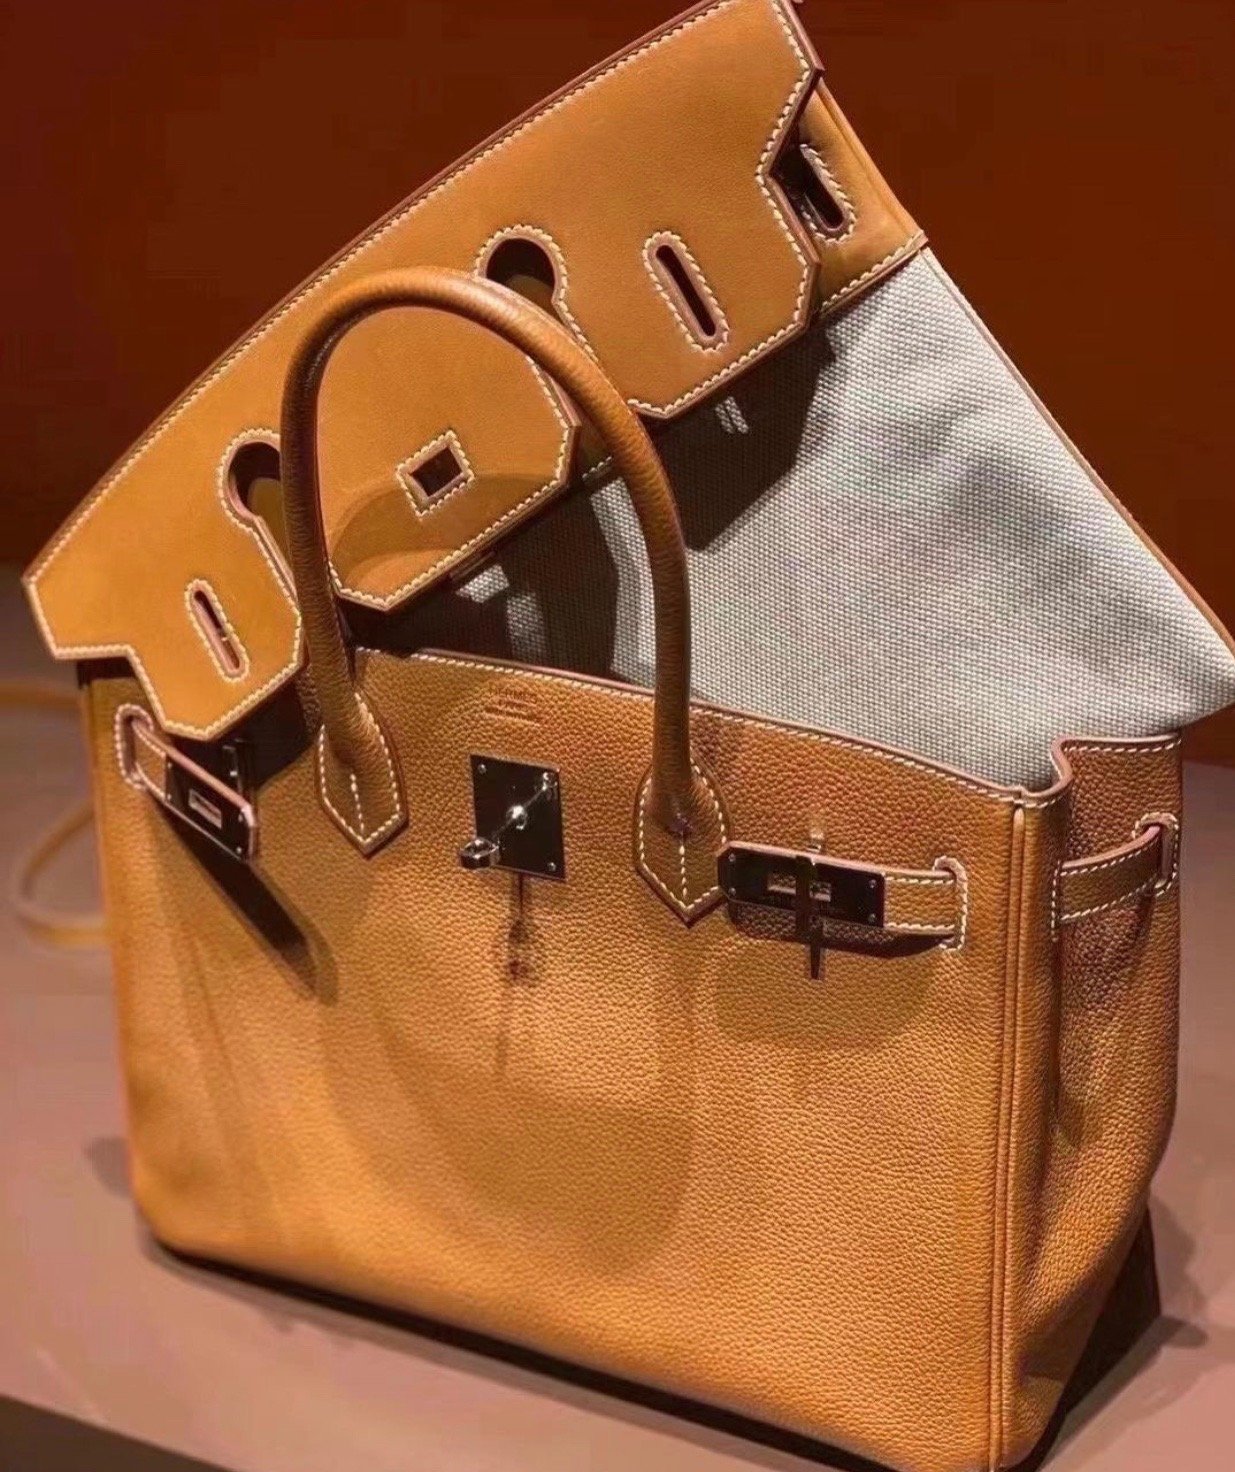 The New Hermes 3 in 1 Birkin for Fall/Winter 2021